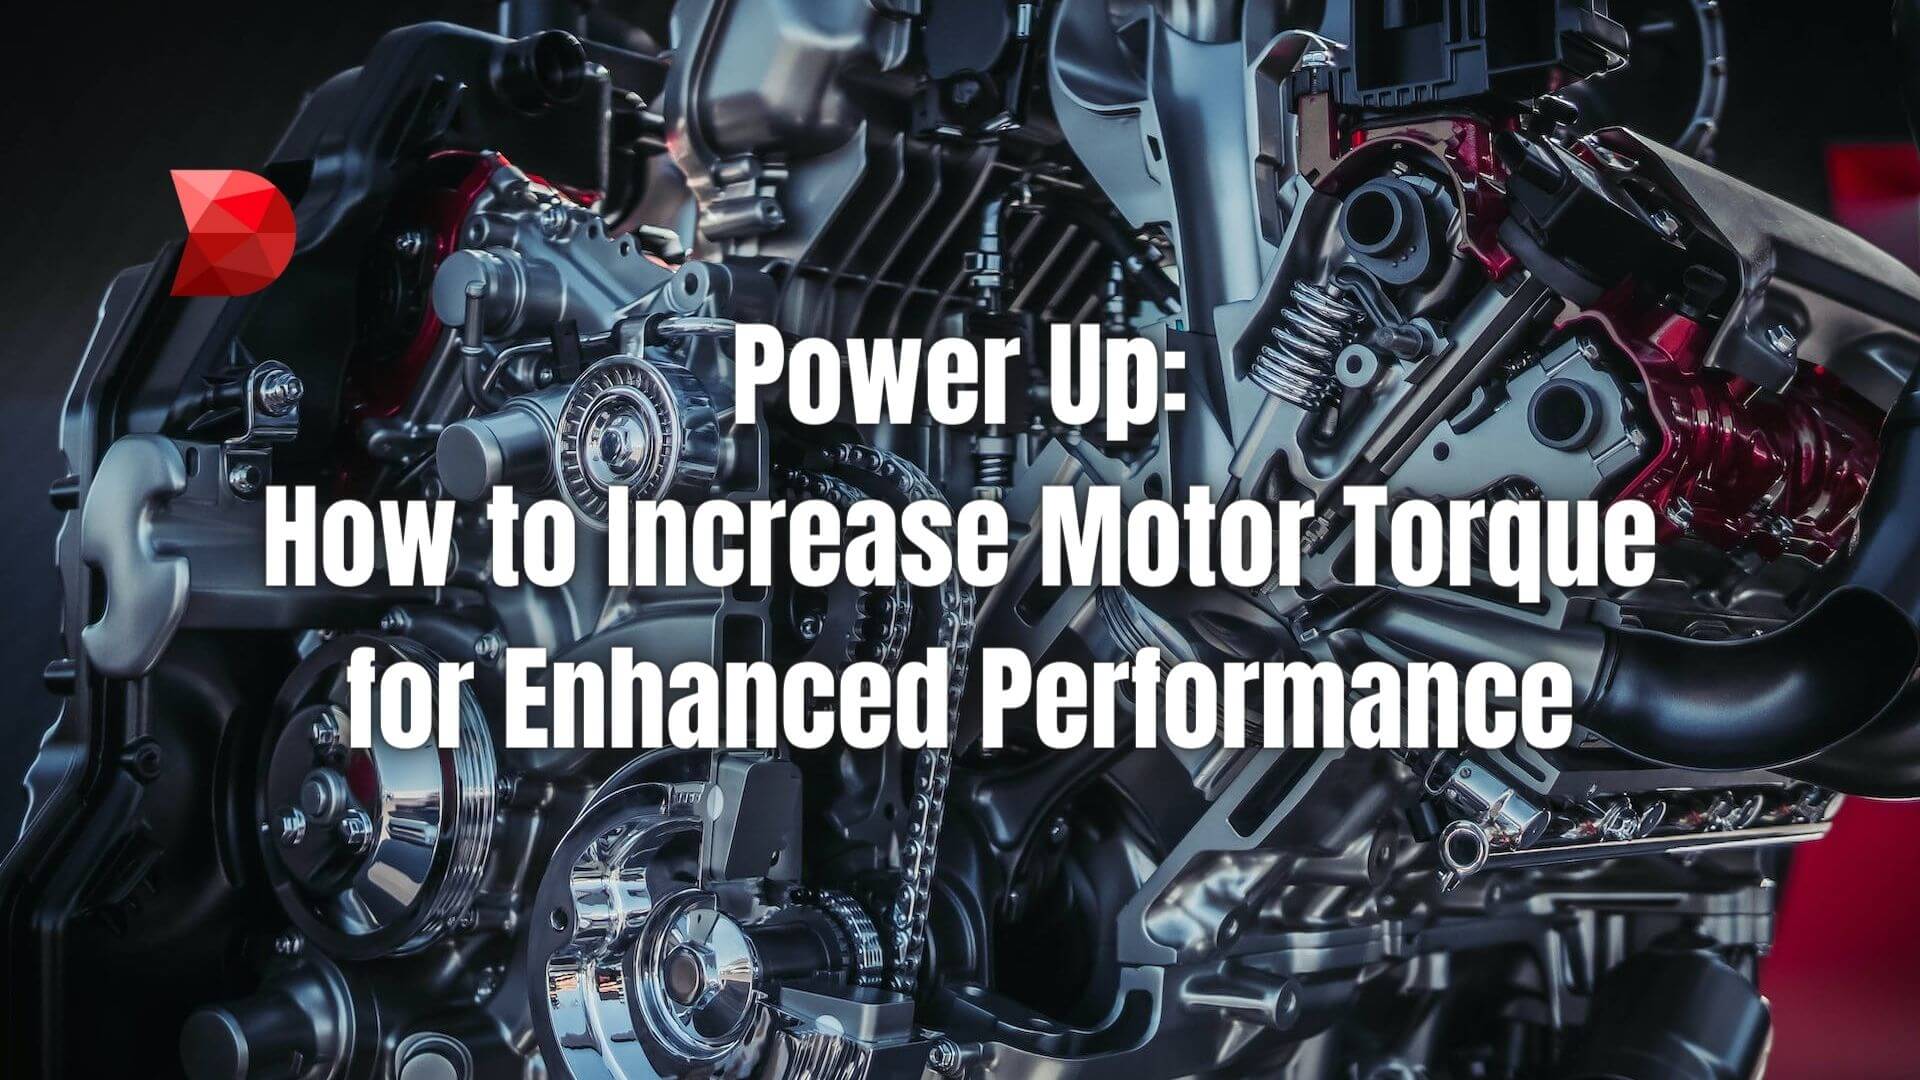 Unlock peak performance! Click here to learn proven methods to increase motor torque for enhanced power. Your ultimate guide awaits!